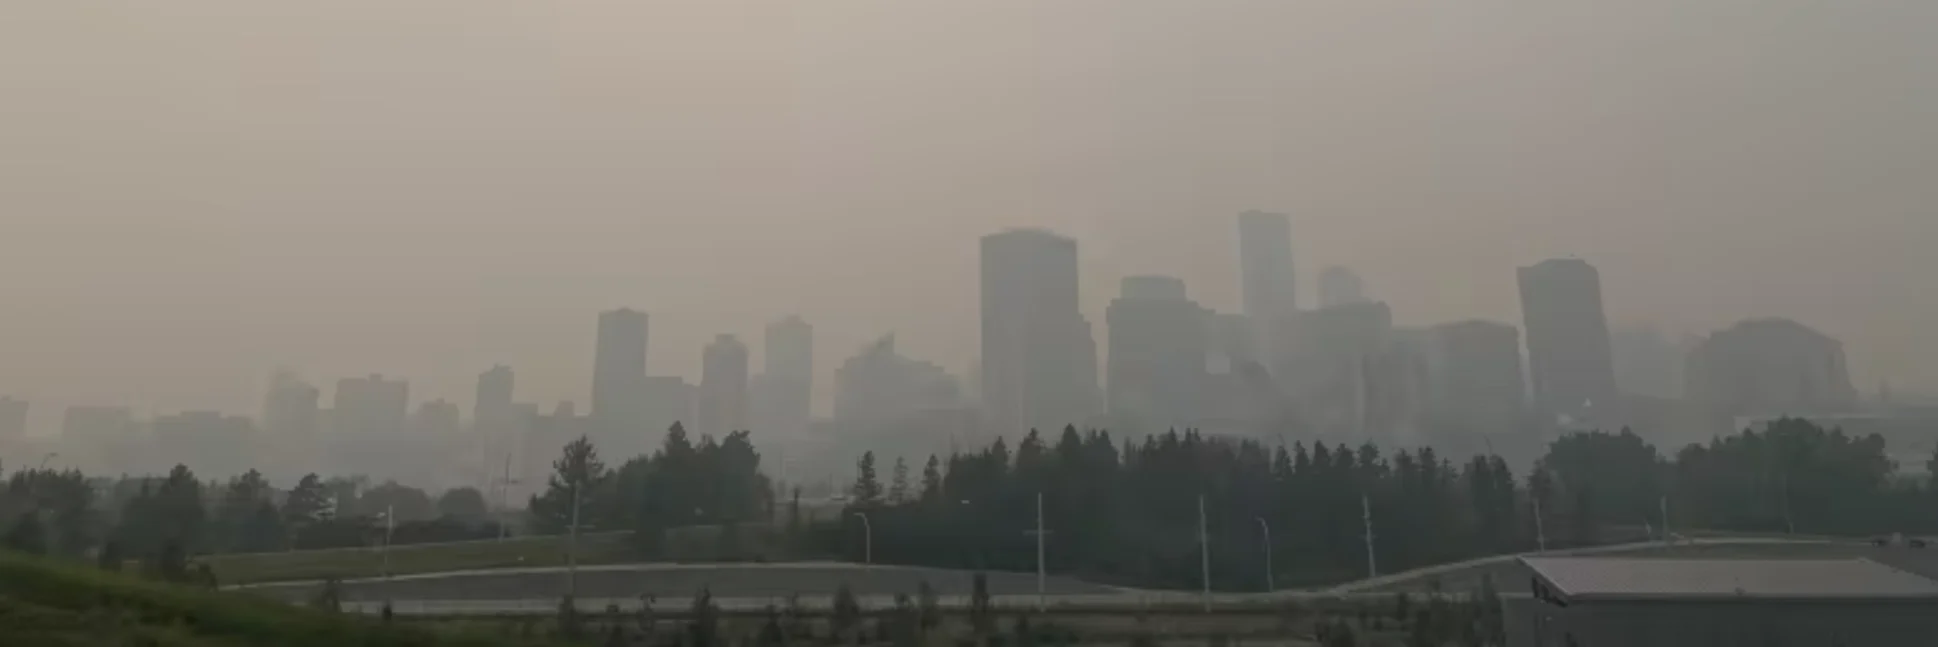 Summer of smoke among the worst on record for Alberta's biggest cities